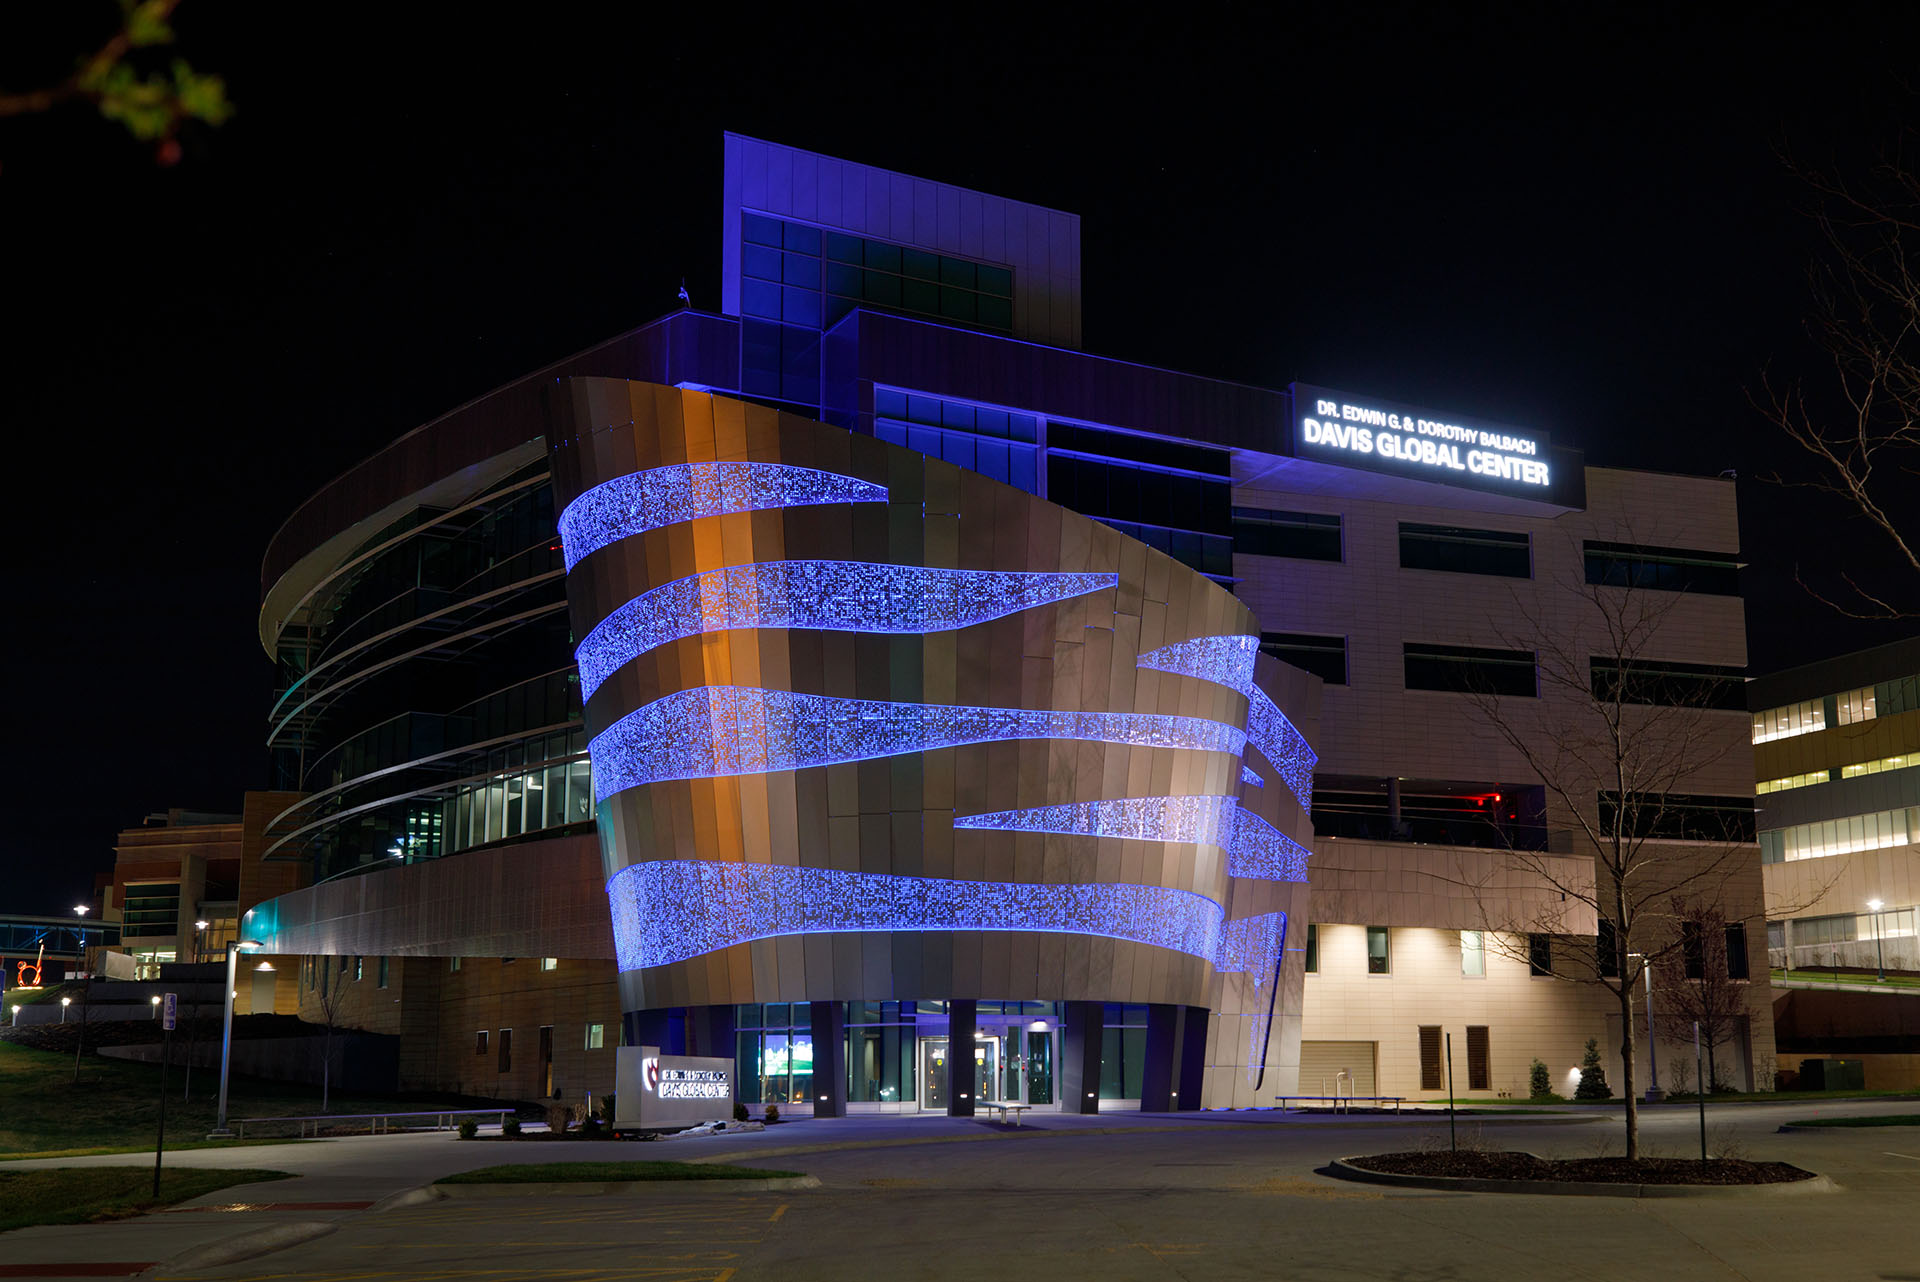 Dr&period; Edwin G&period; & Dorothy Balbach Davis Global Center lit up in blue on April 2&comma; 2021&comma; to celebrate World Autism Day&period;